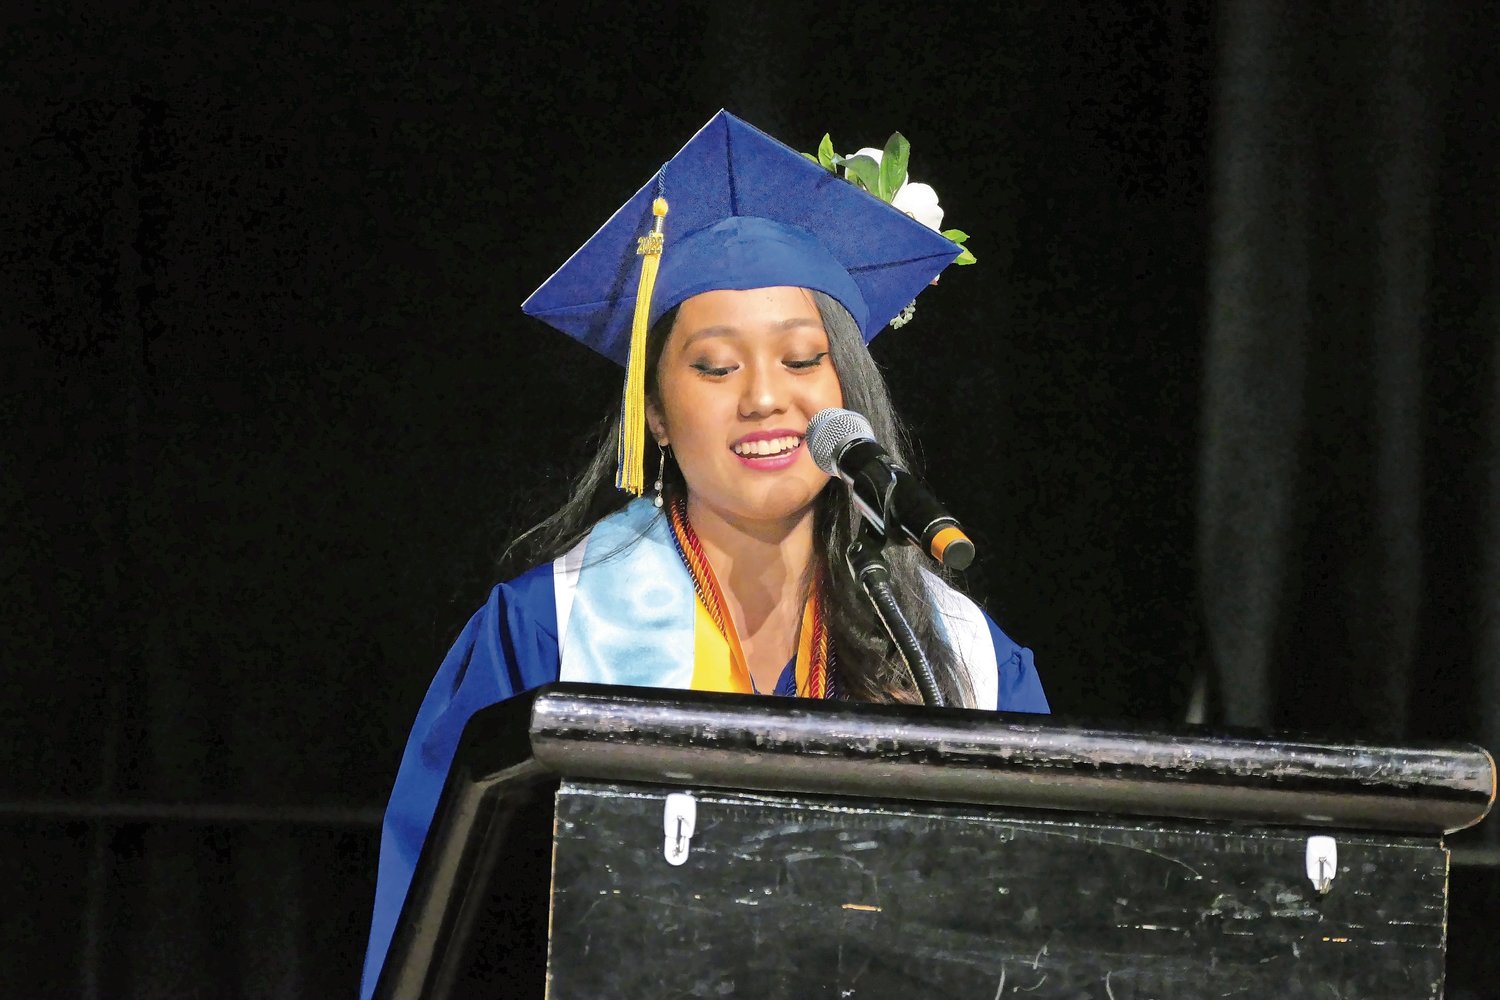 Lawrence class of 2022 valedictorian Gabrielle Domanas addressed her fellow graduates from the heart.